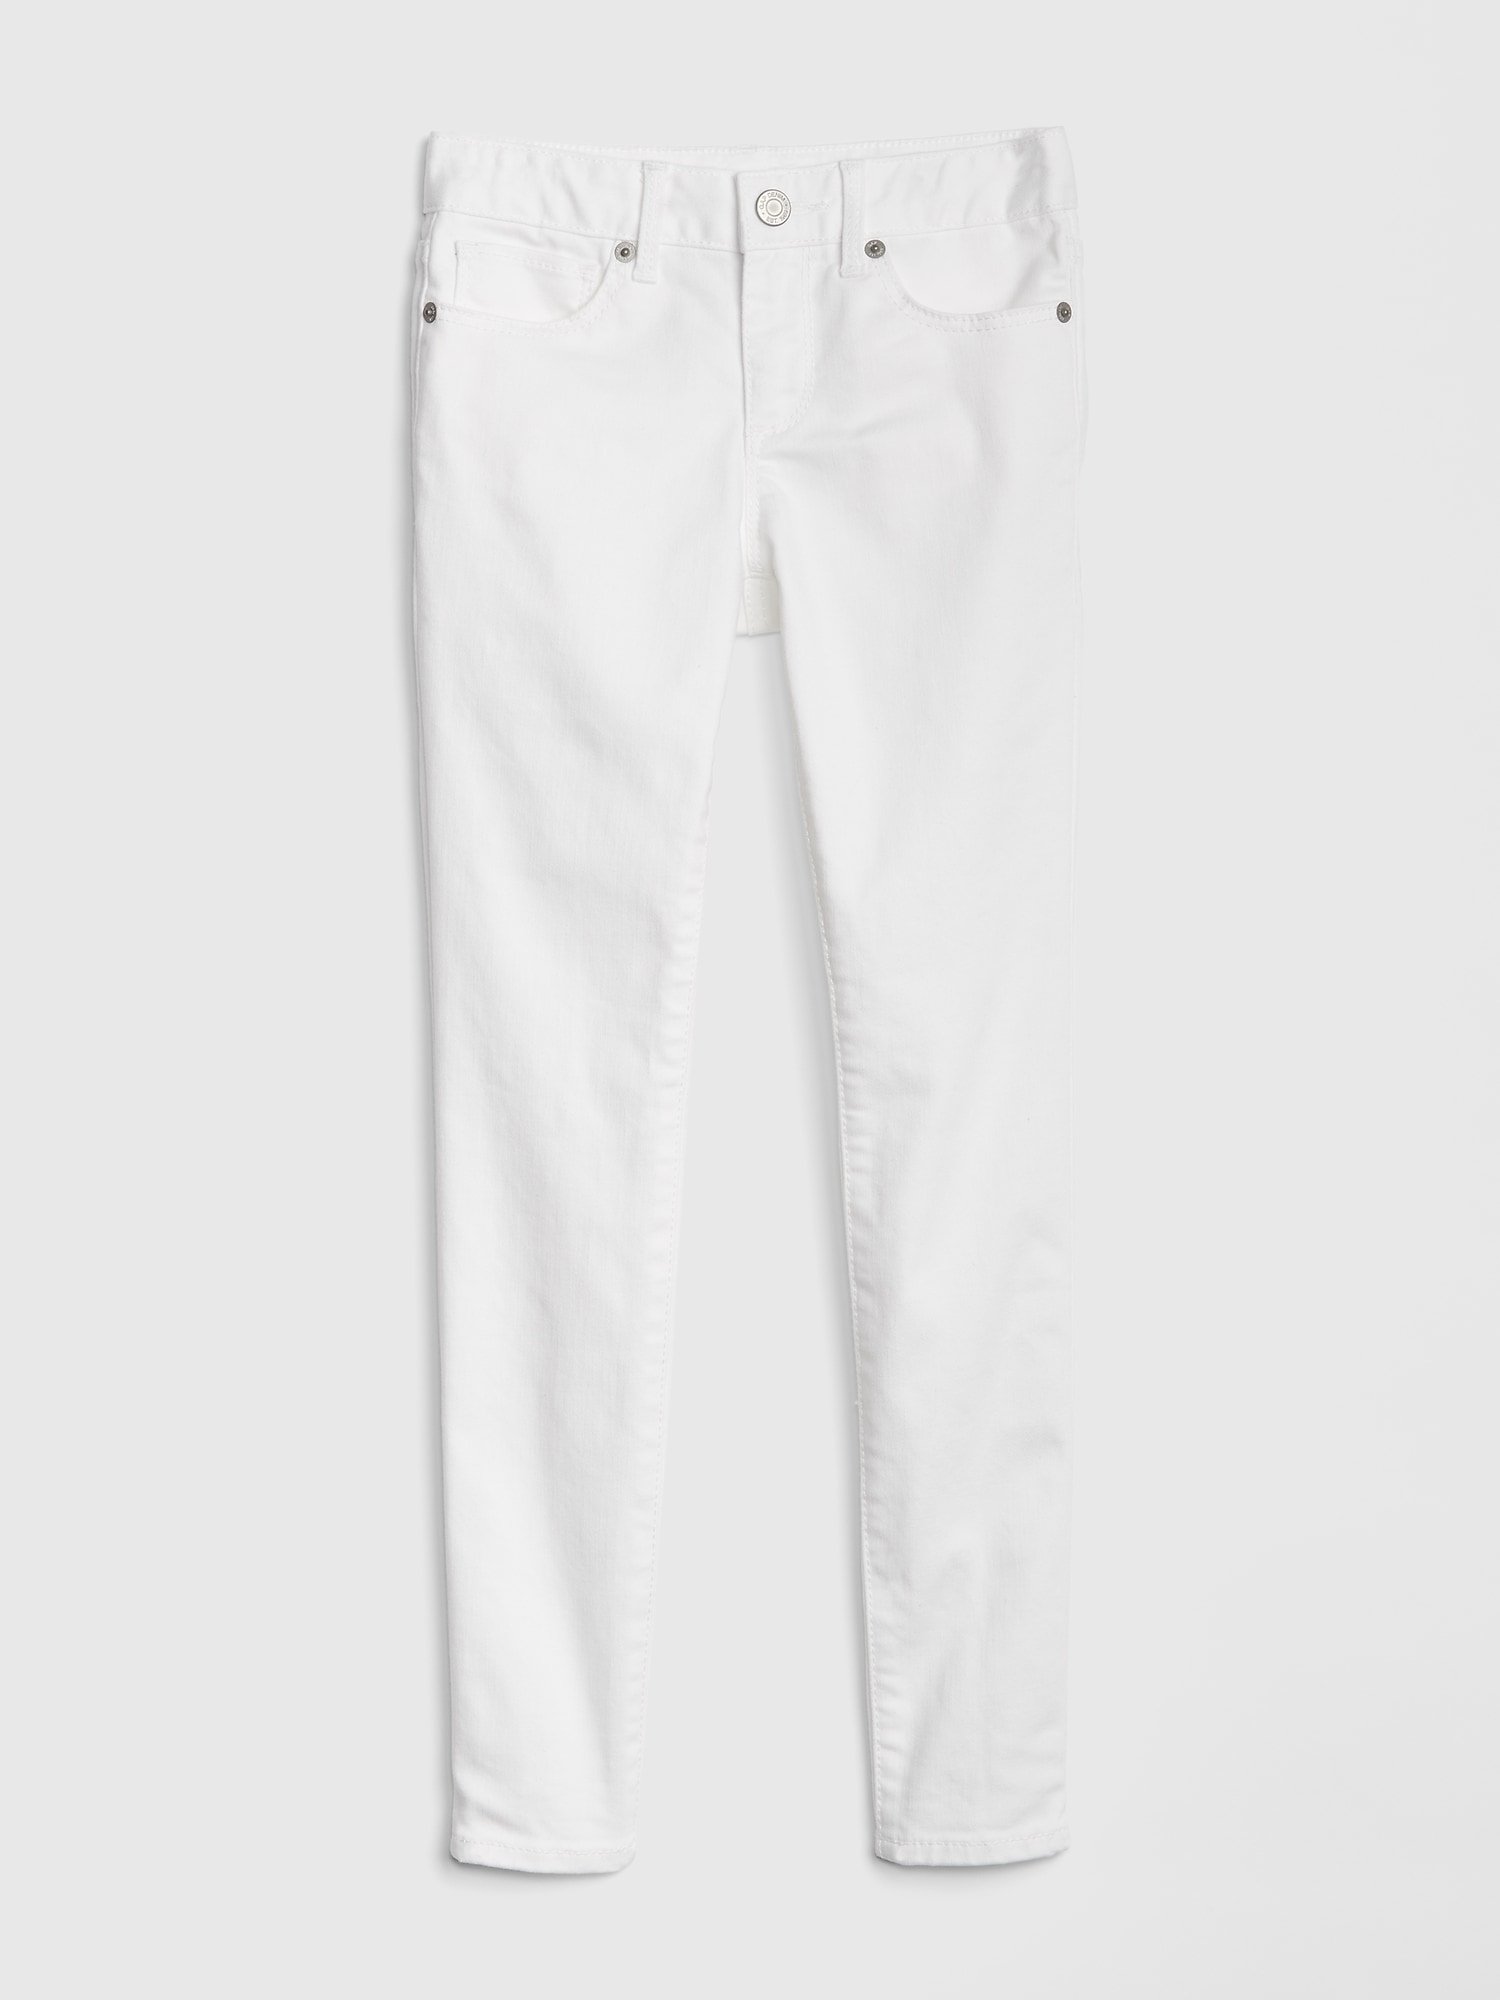 Super Skinny Jeans product image